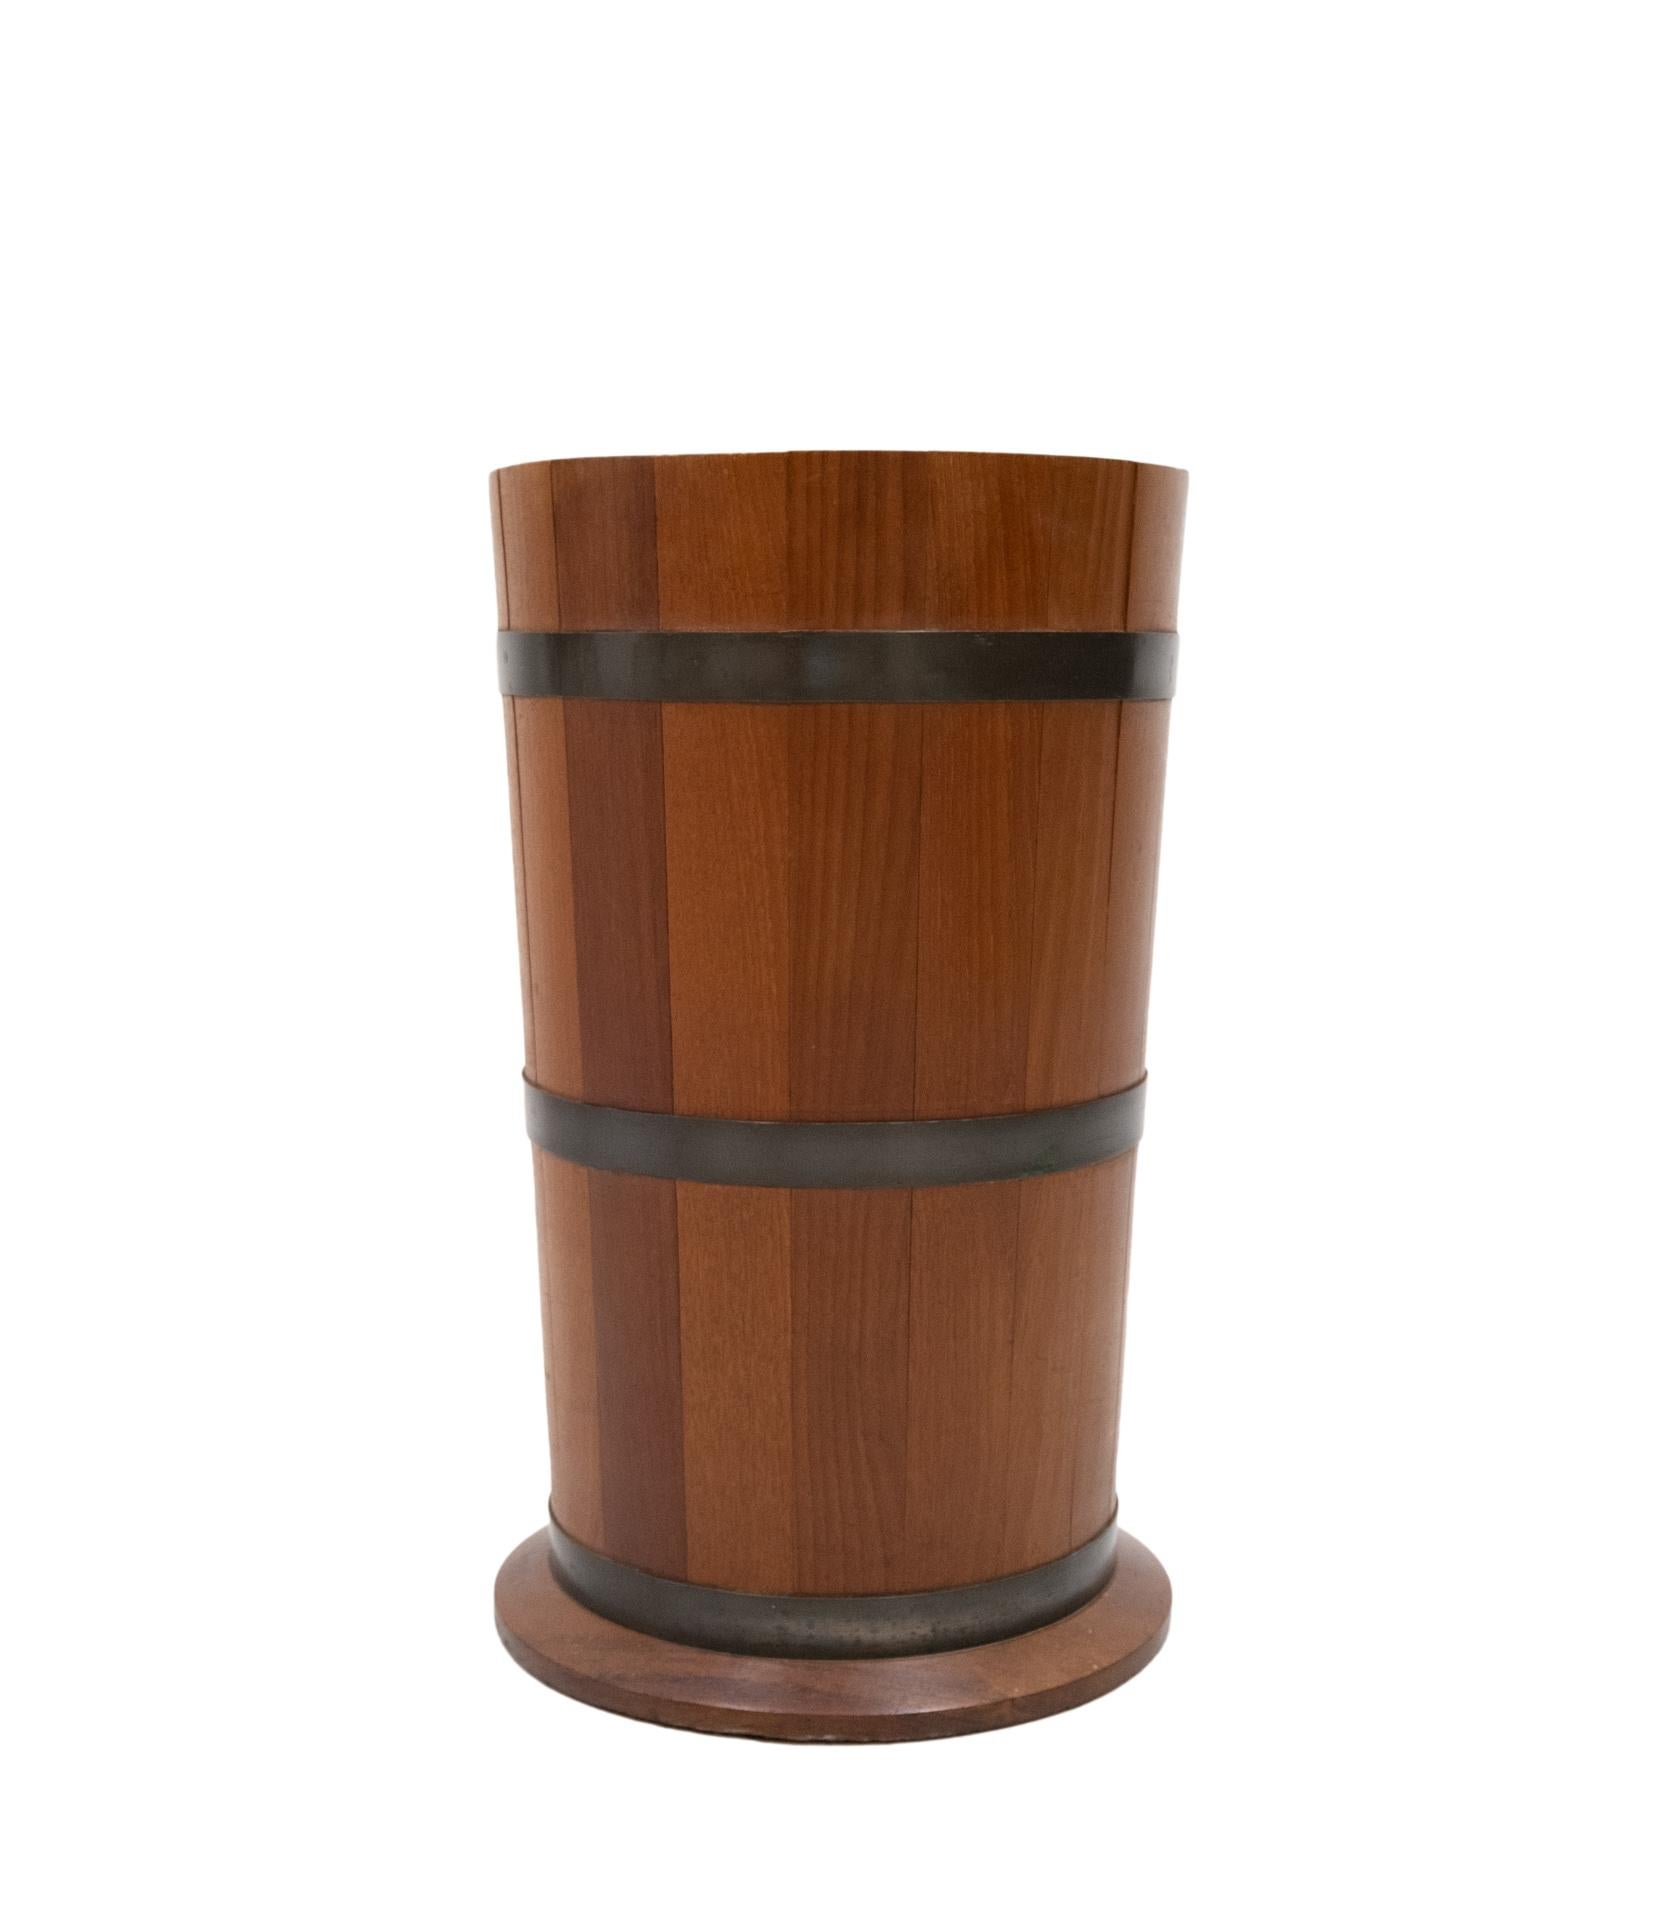 Solid teak Scandinavian umbrella stand. Build like a barrel. Solid teak planks hold together
With brass rings. Very nice warm color. Good condition.